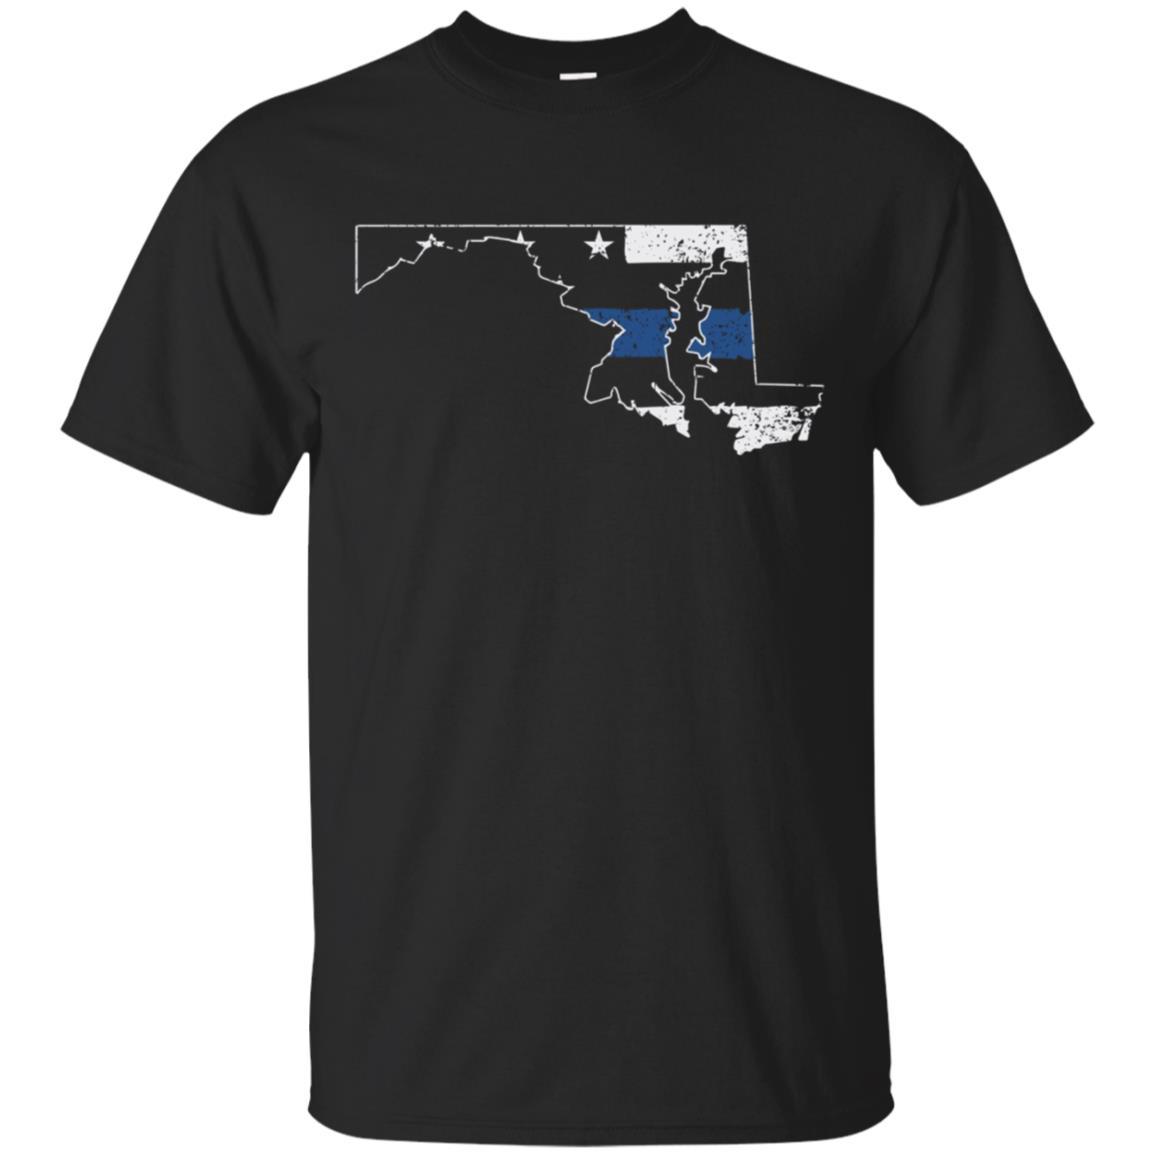 Find Maryland Police Shirt, Thin Blue Line T Shirts